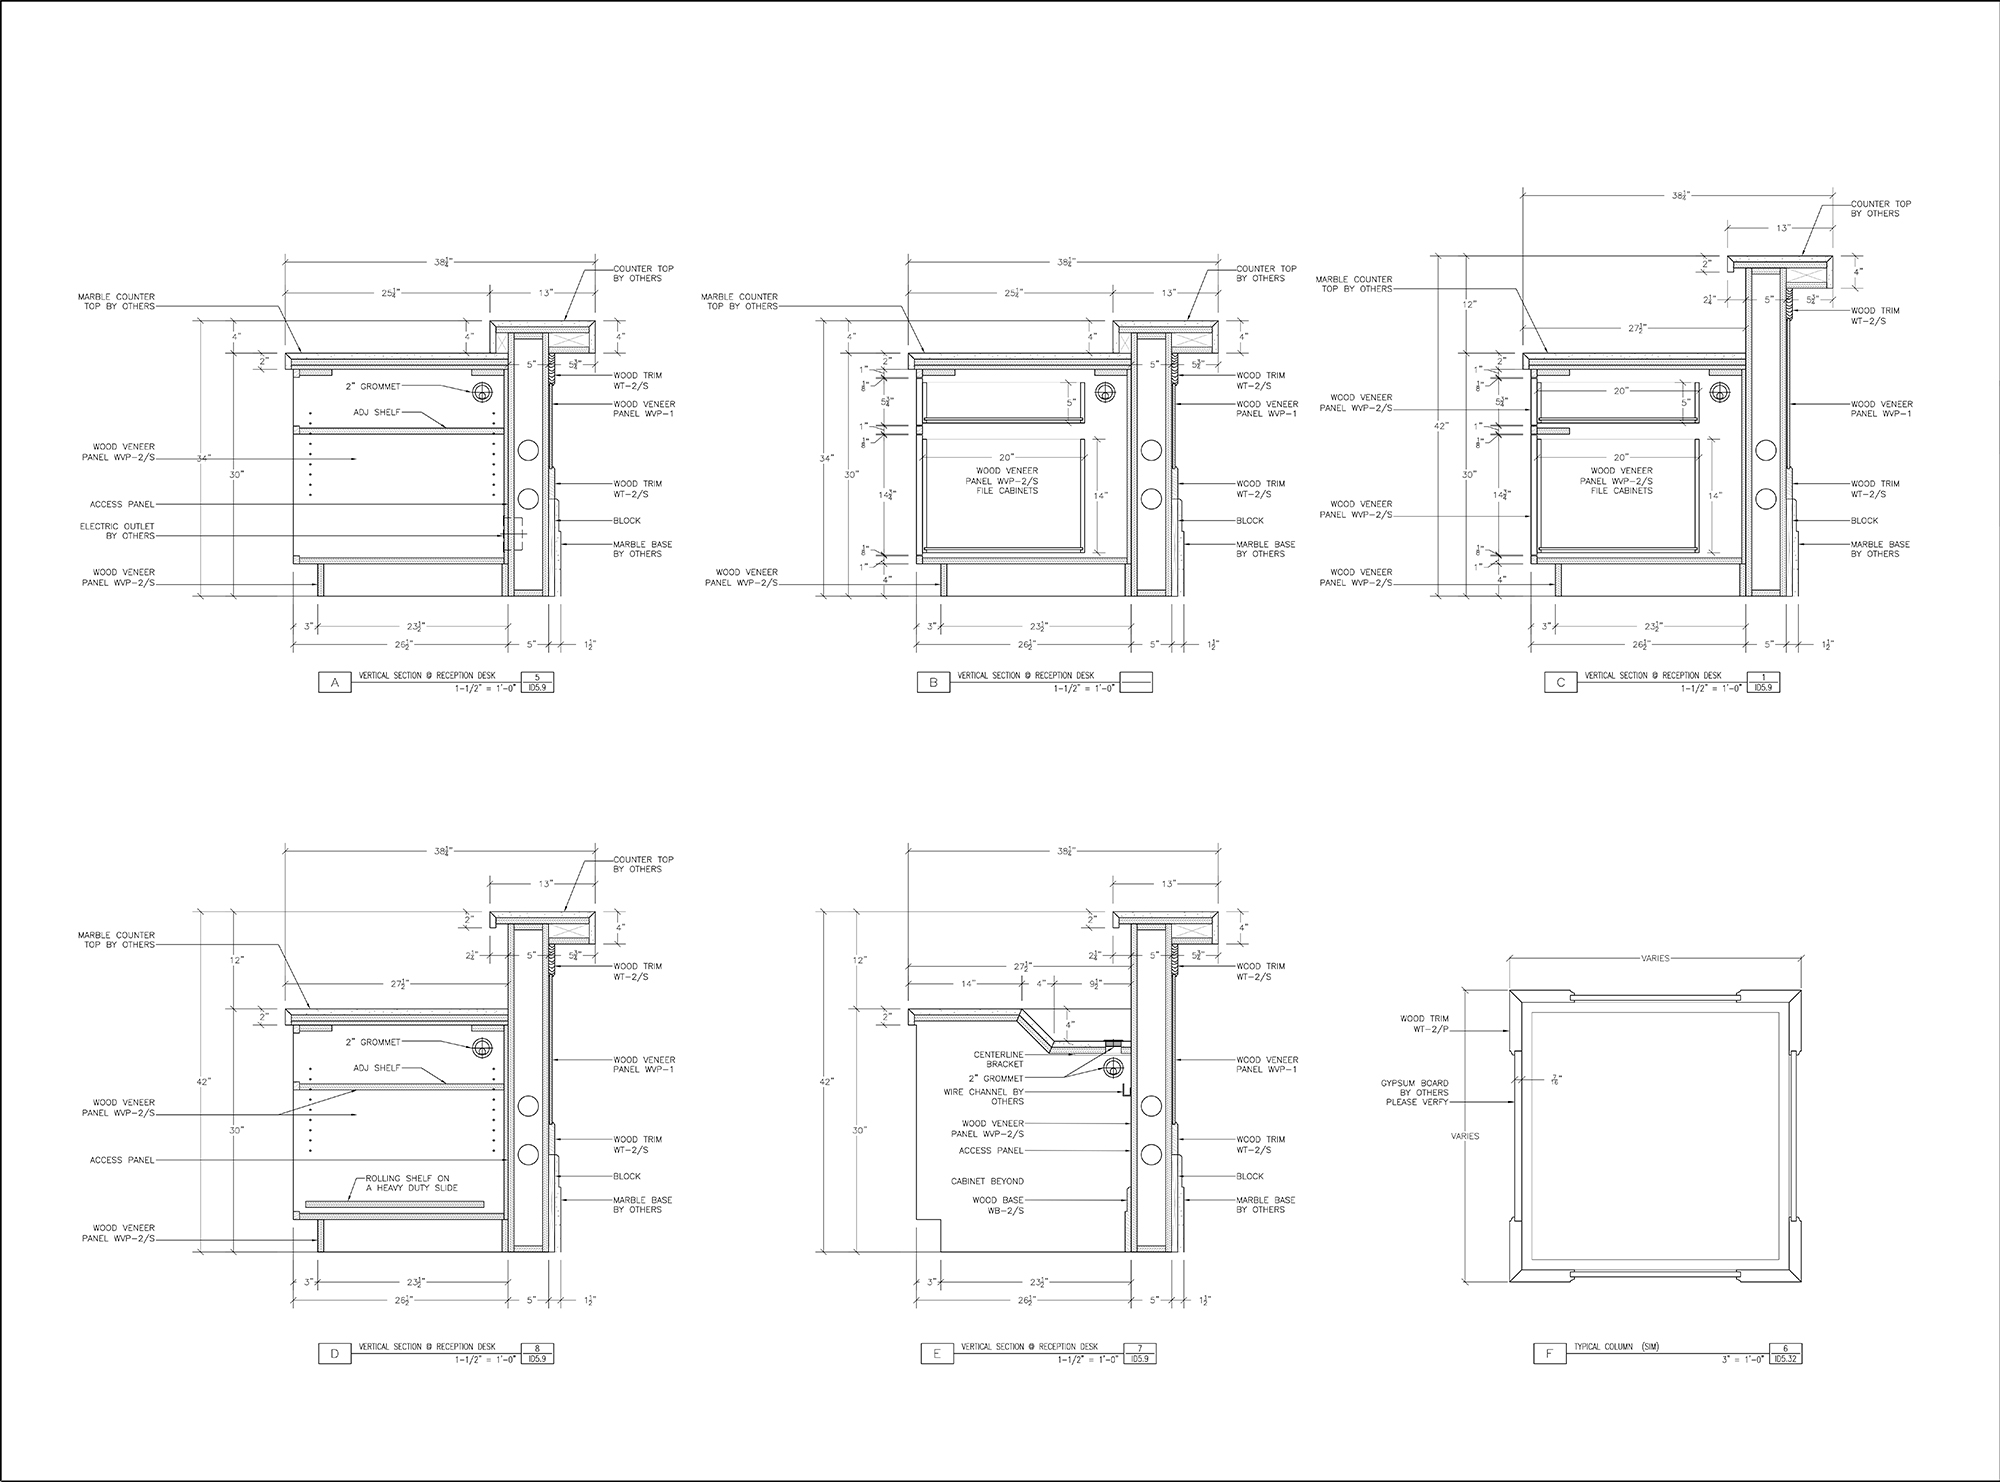 Shop Drawings Drafting Services Millwork Drafting Solutions Llc